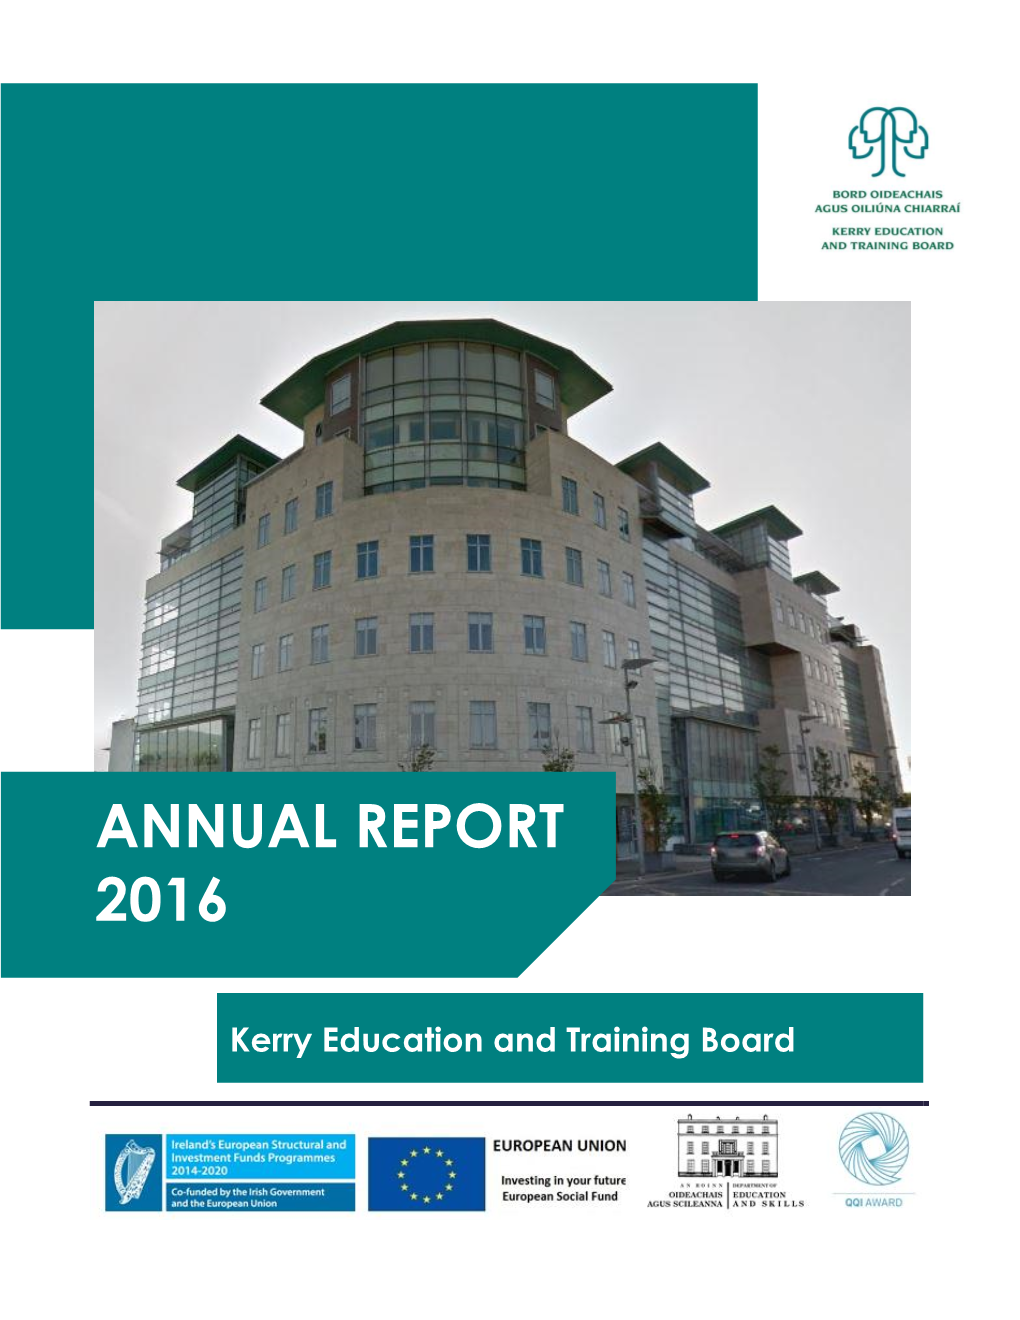 ANNUAL REPORT 2016 Annual Report of Kerry ETB As Required by Section 22 of the Protected Disclosures Act 2014